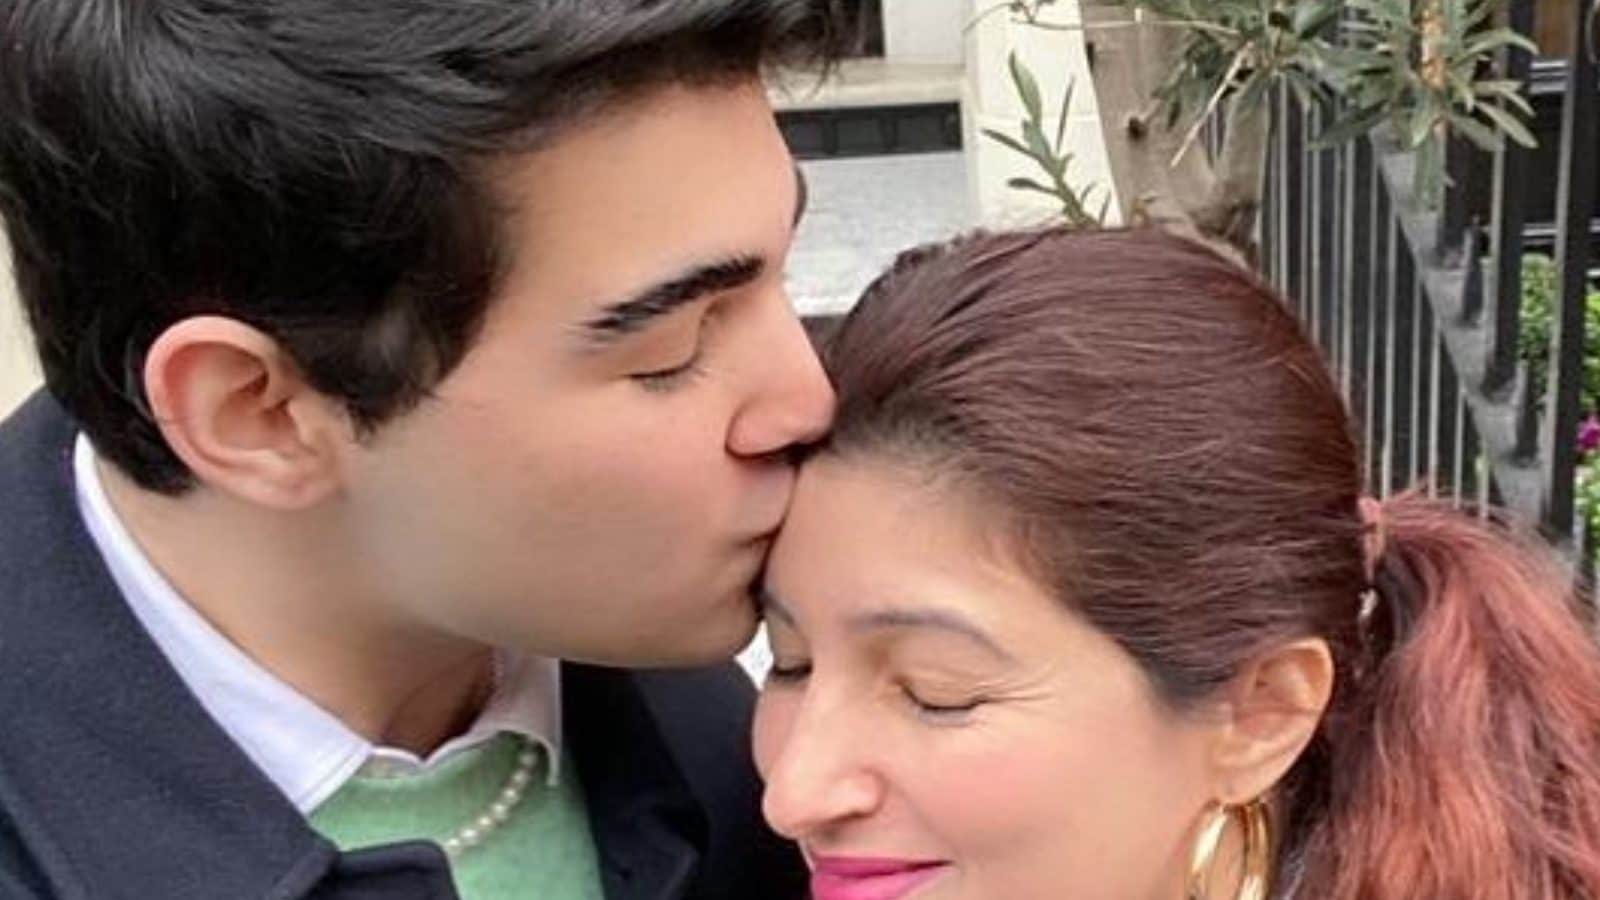 Twinkle Khanna Shares Adorable Photo With Son Aarav; His Pearl Necklace Steals the Show